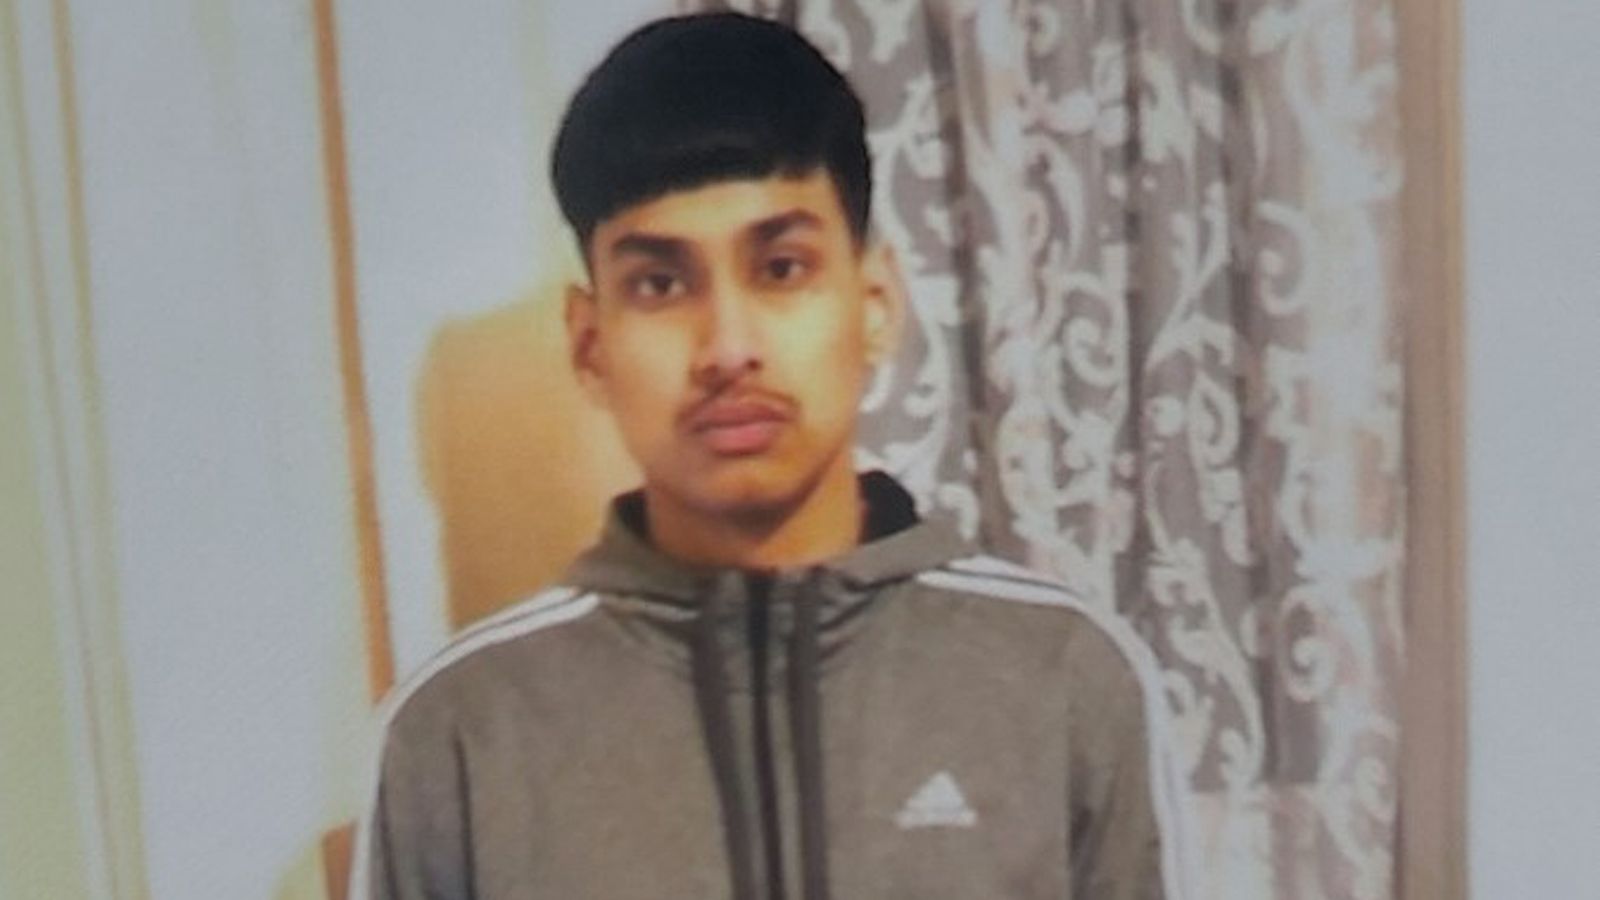 Man charged with murder after teenager fatally stabbed in Sheffield